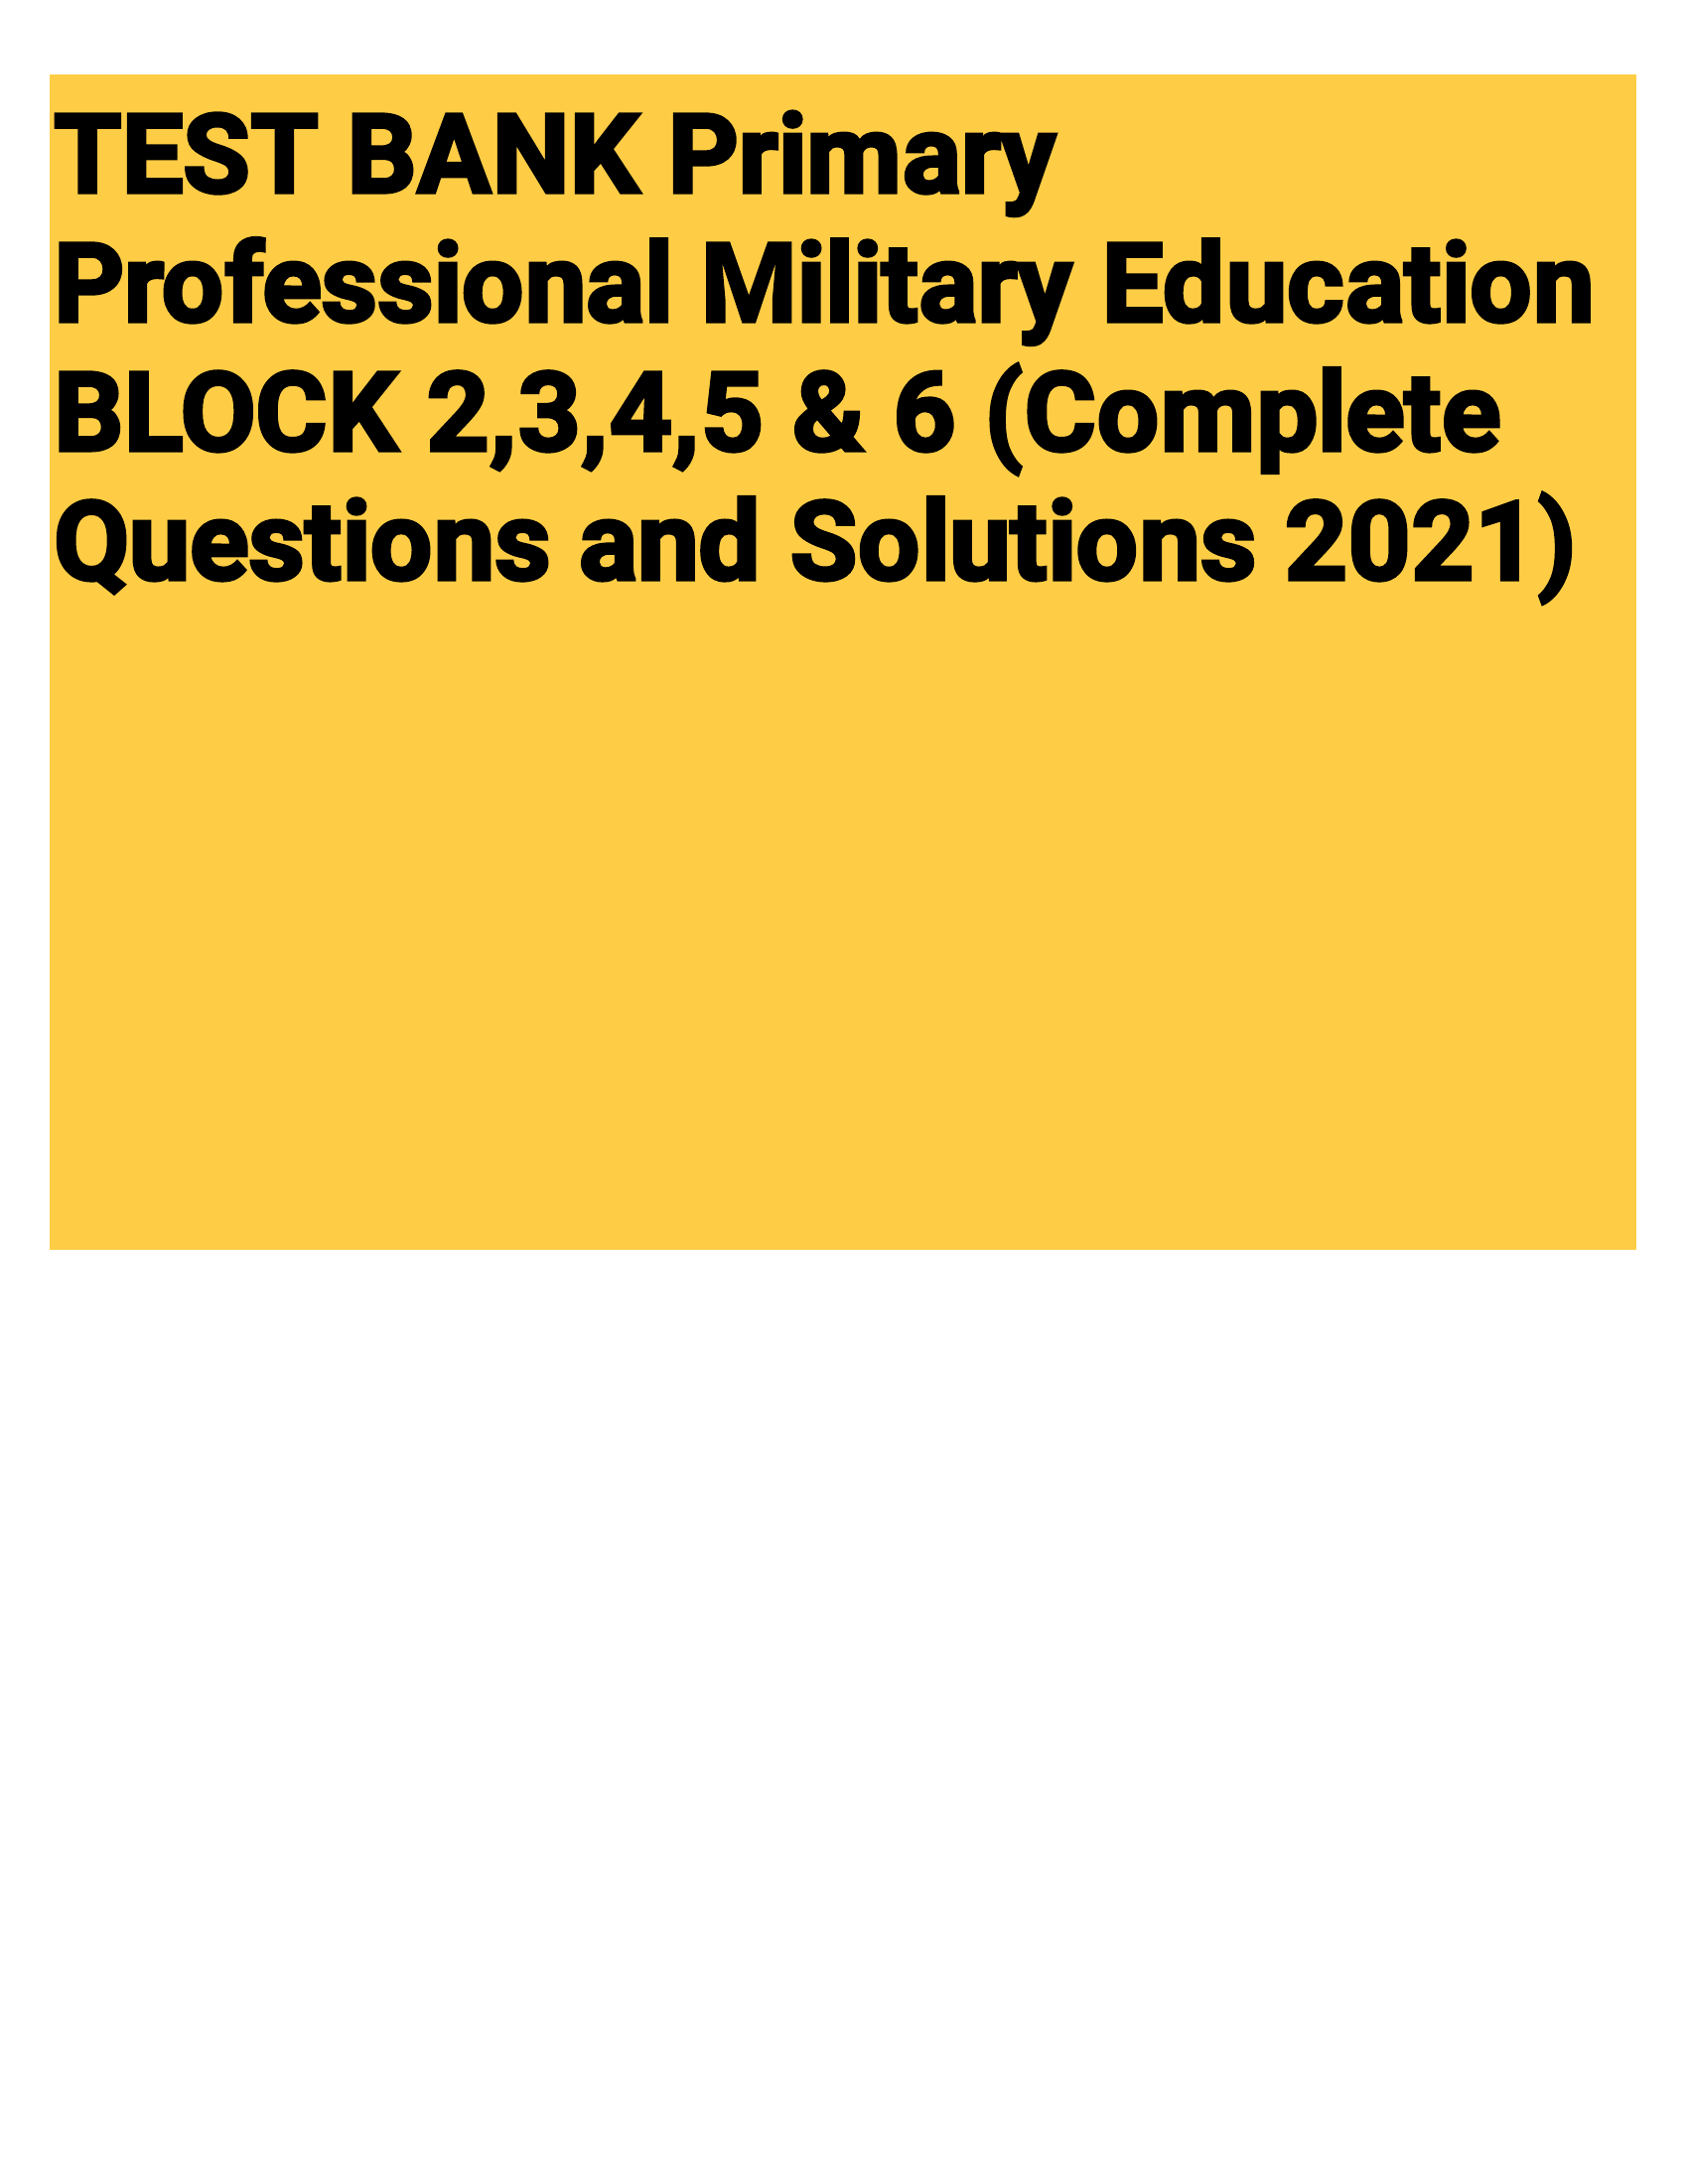 Primary Professional Military Education BLOCK 2,3,4,5 & 6